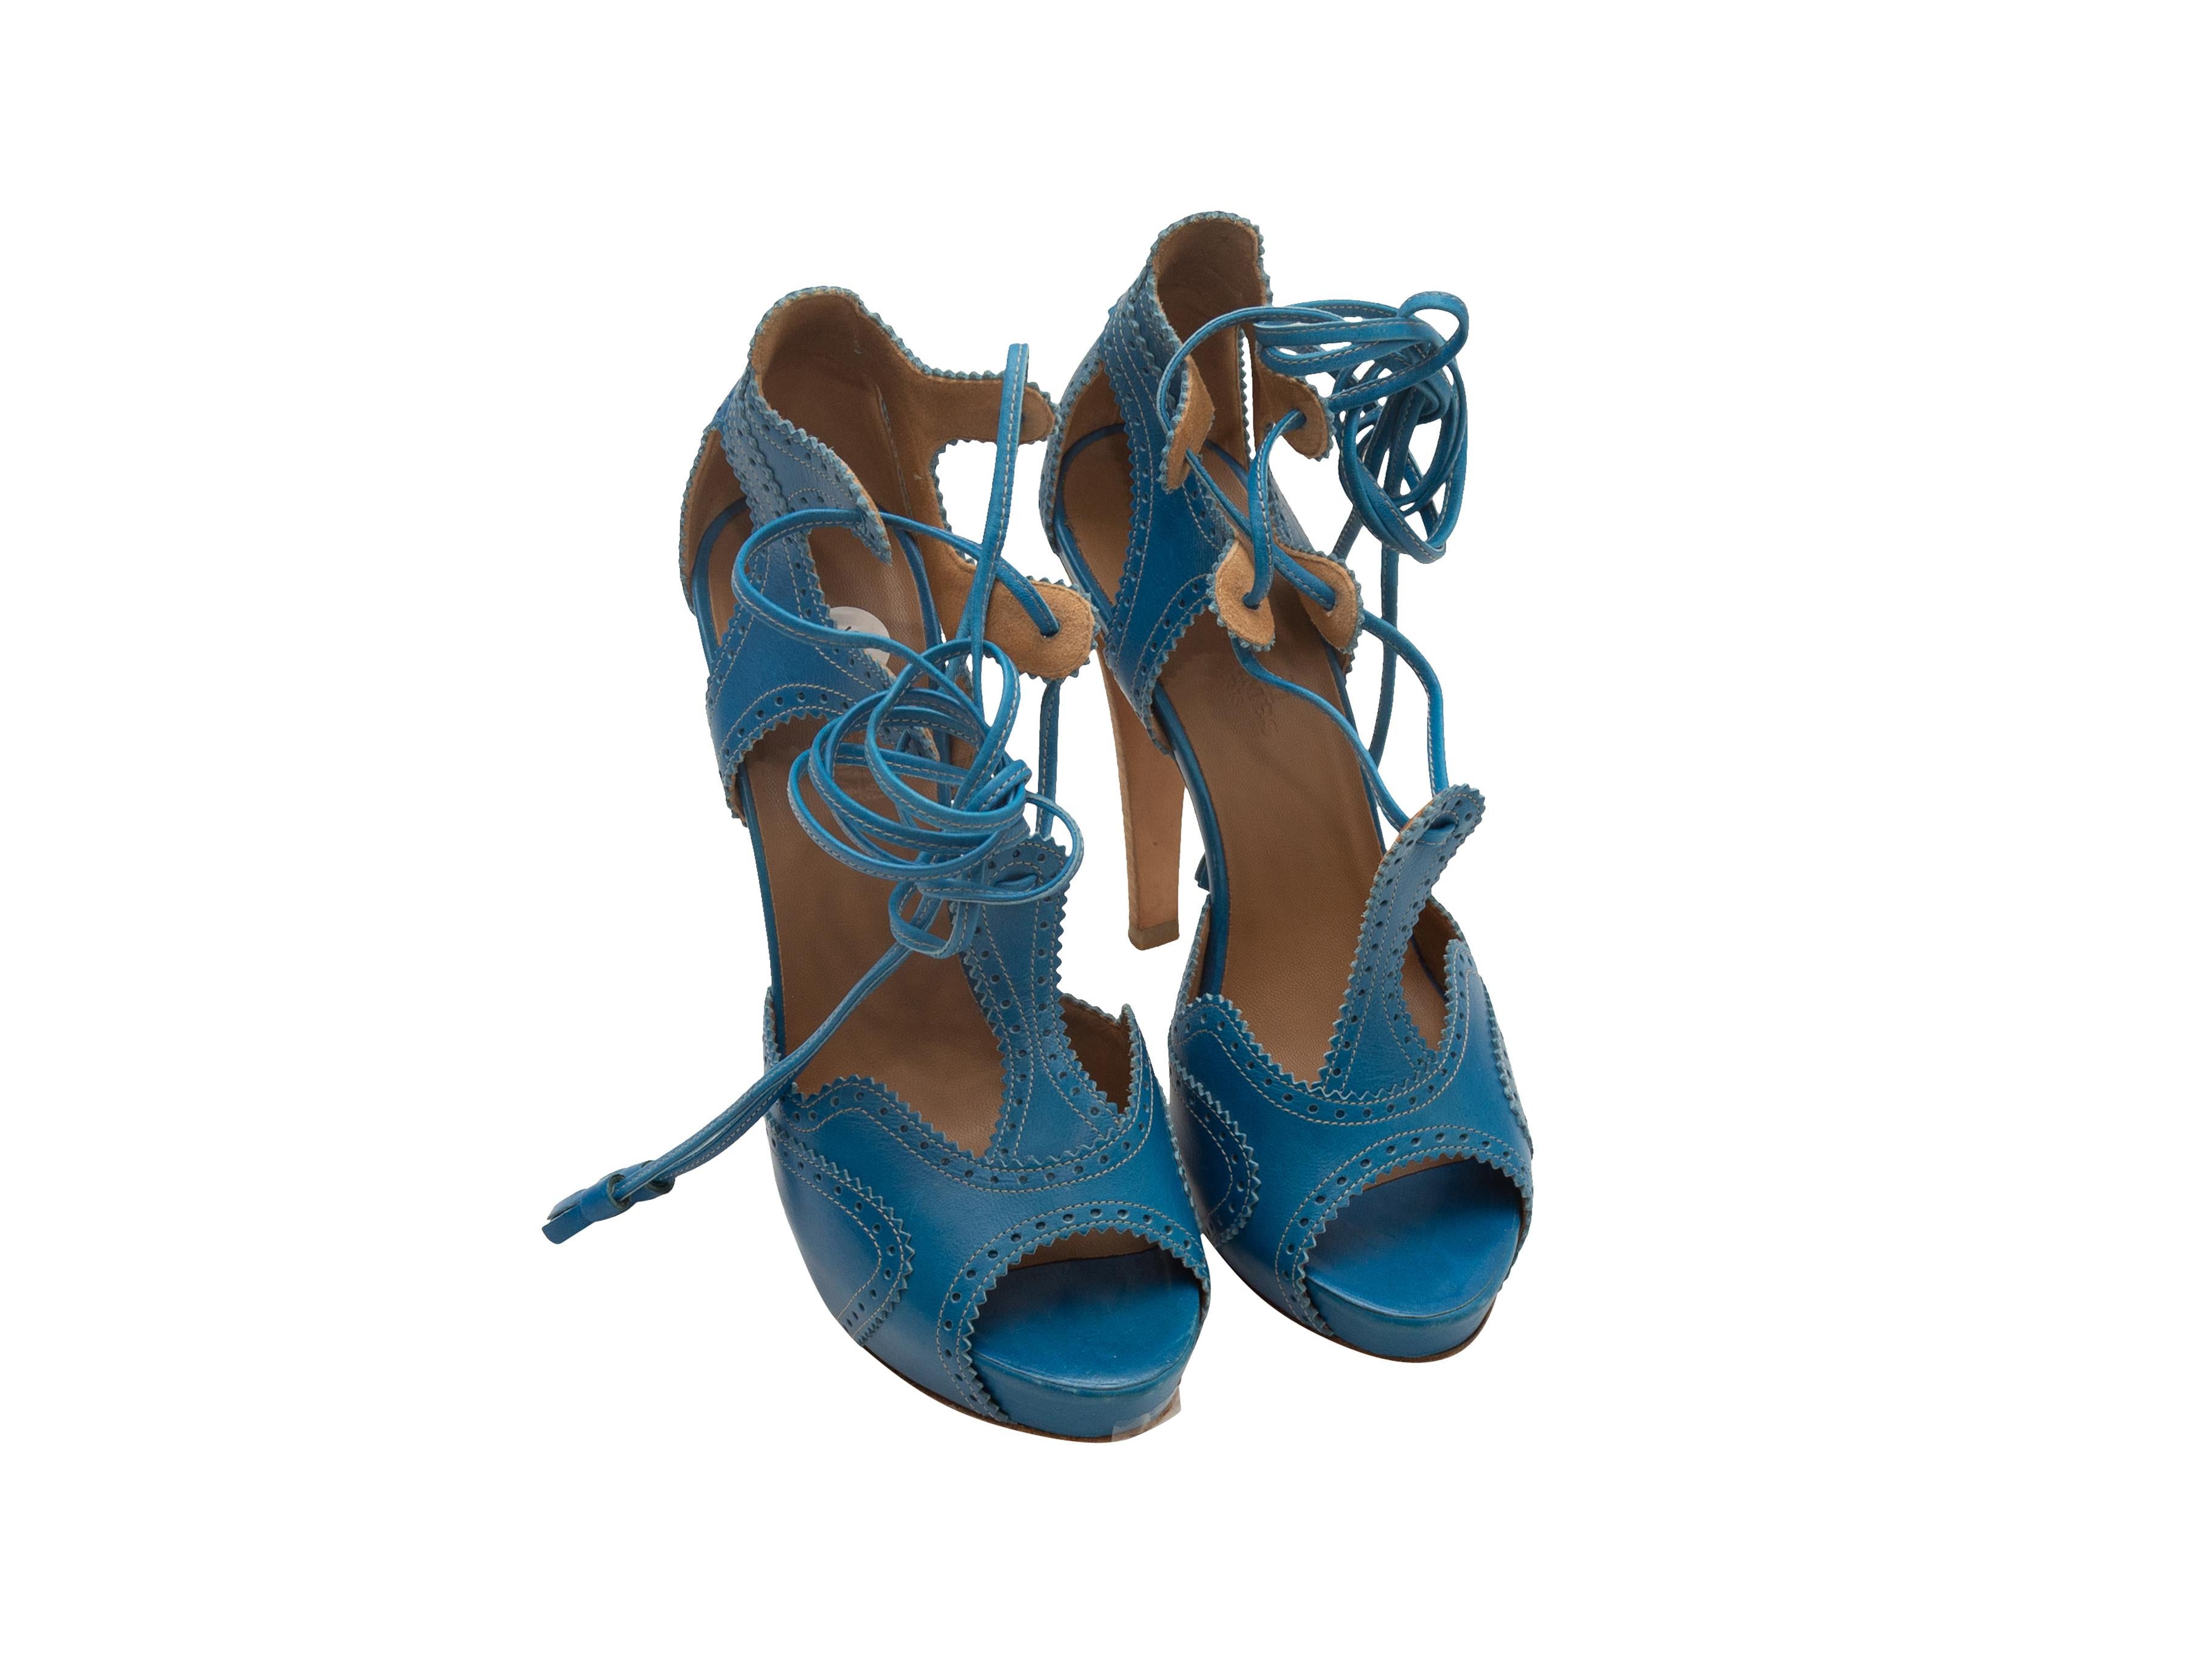 Product details: Blue leather cutout peep-toe heels by Hermes. Brogue detailing throughout. Stacked heels. Lace-up tie closures at tops. Designer size 37.5. 4.75